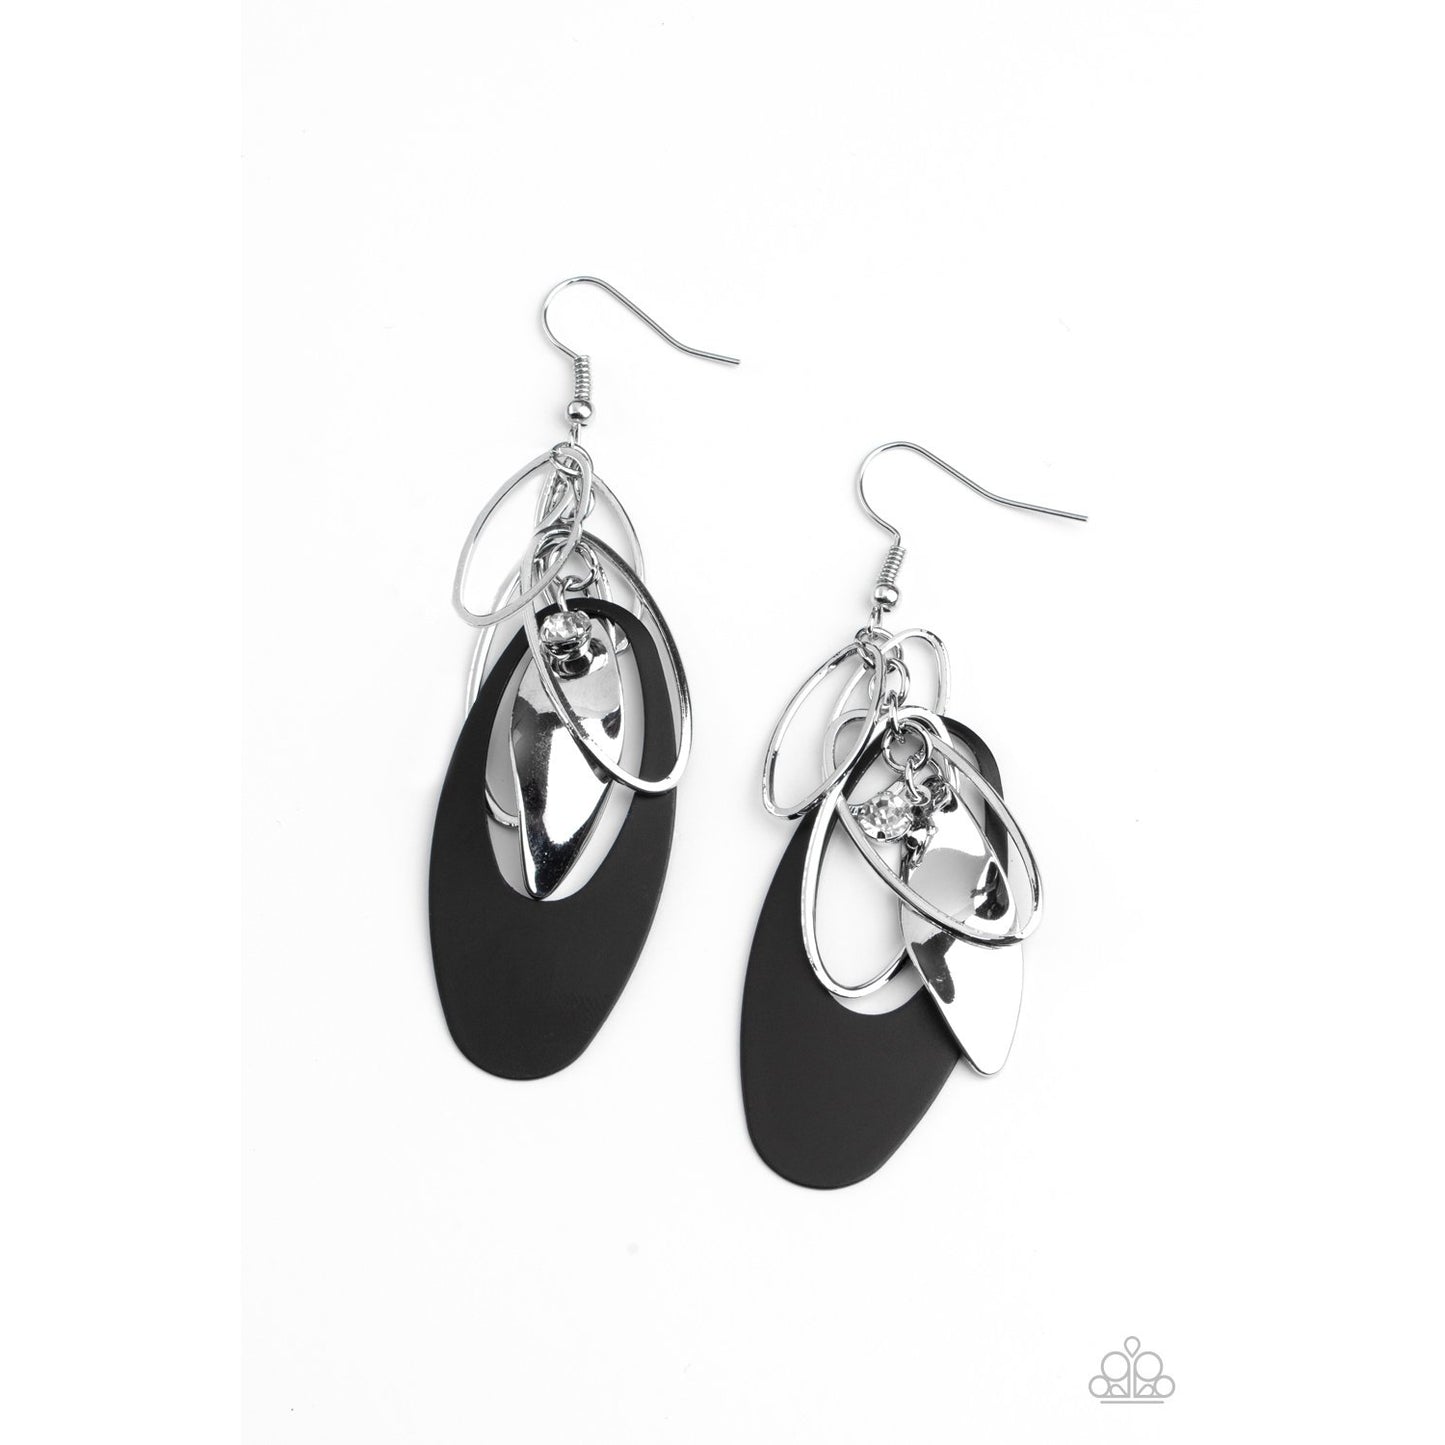 Ambitious Allure - Black and Silver Earrings - Paparazzi Accessories - GlaMarous Titi Jewels